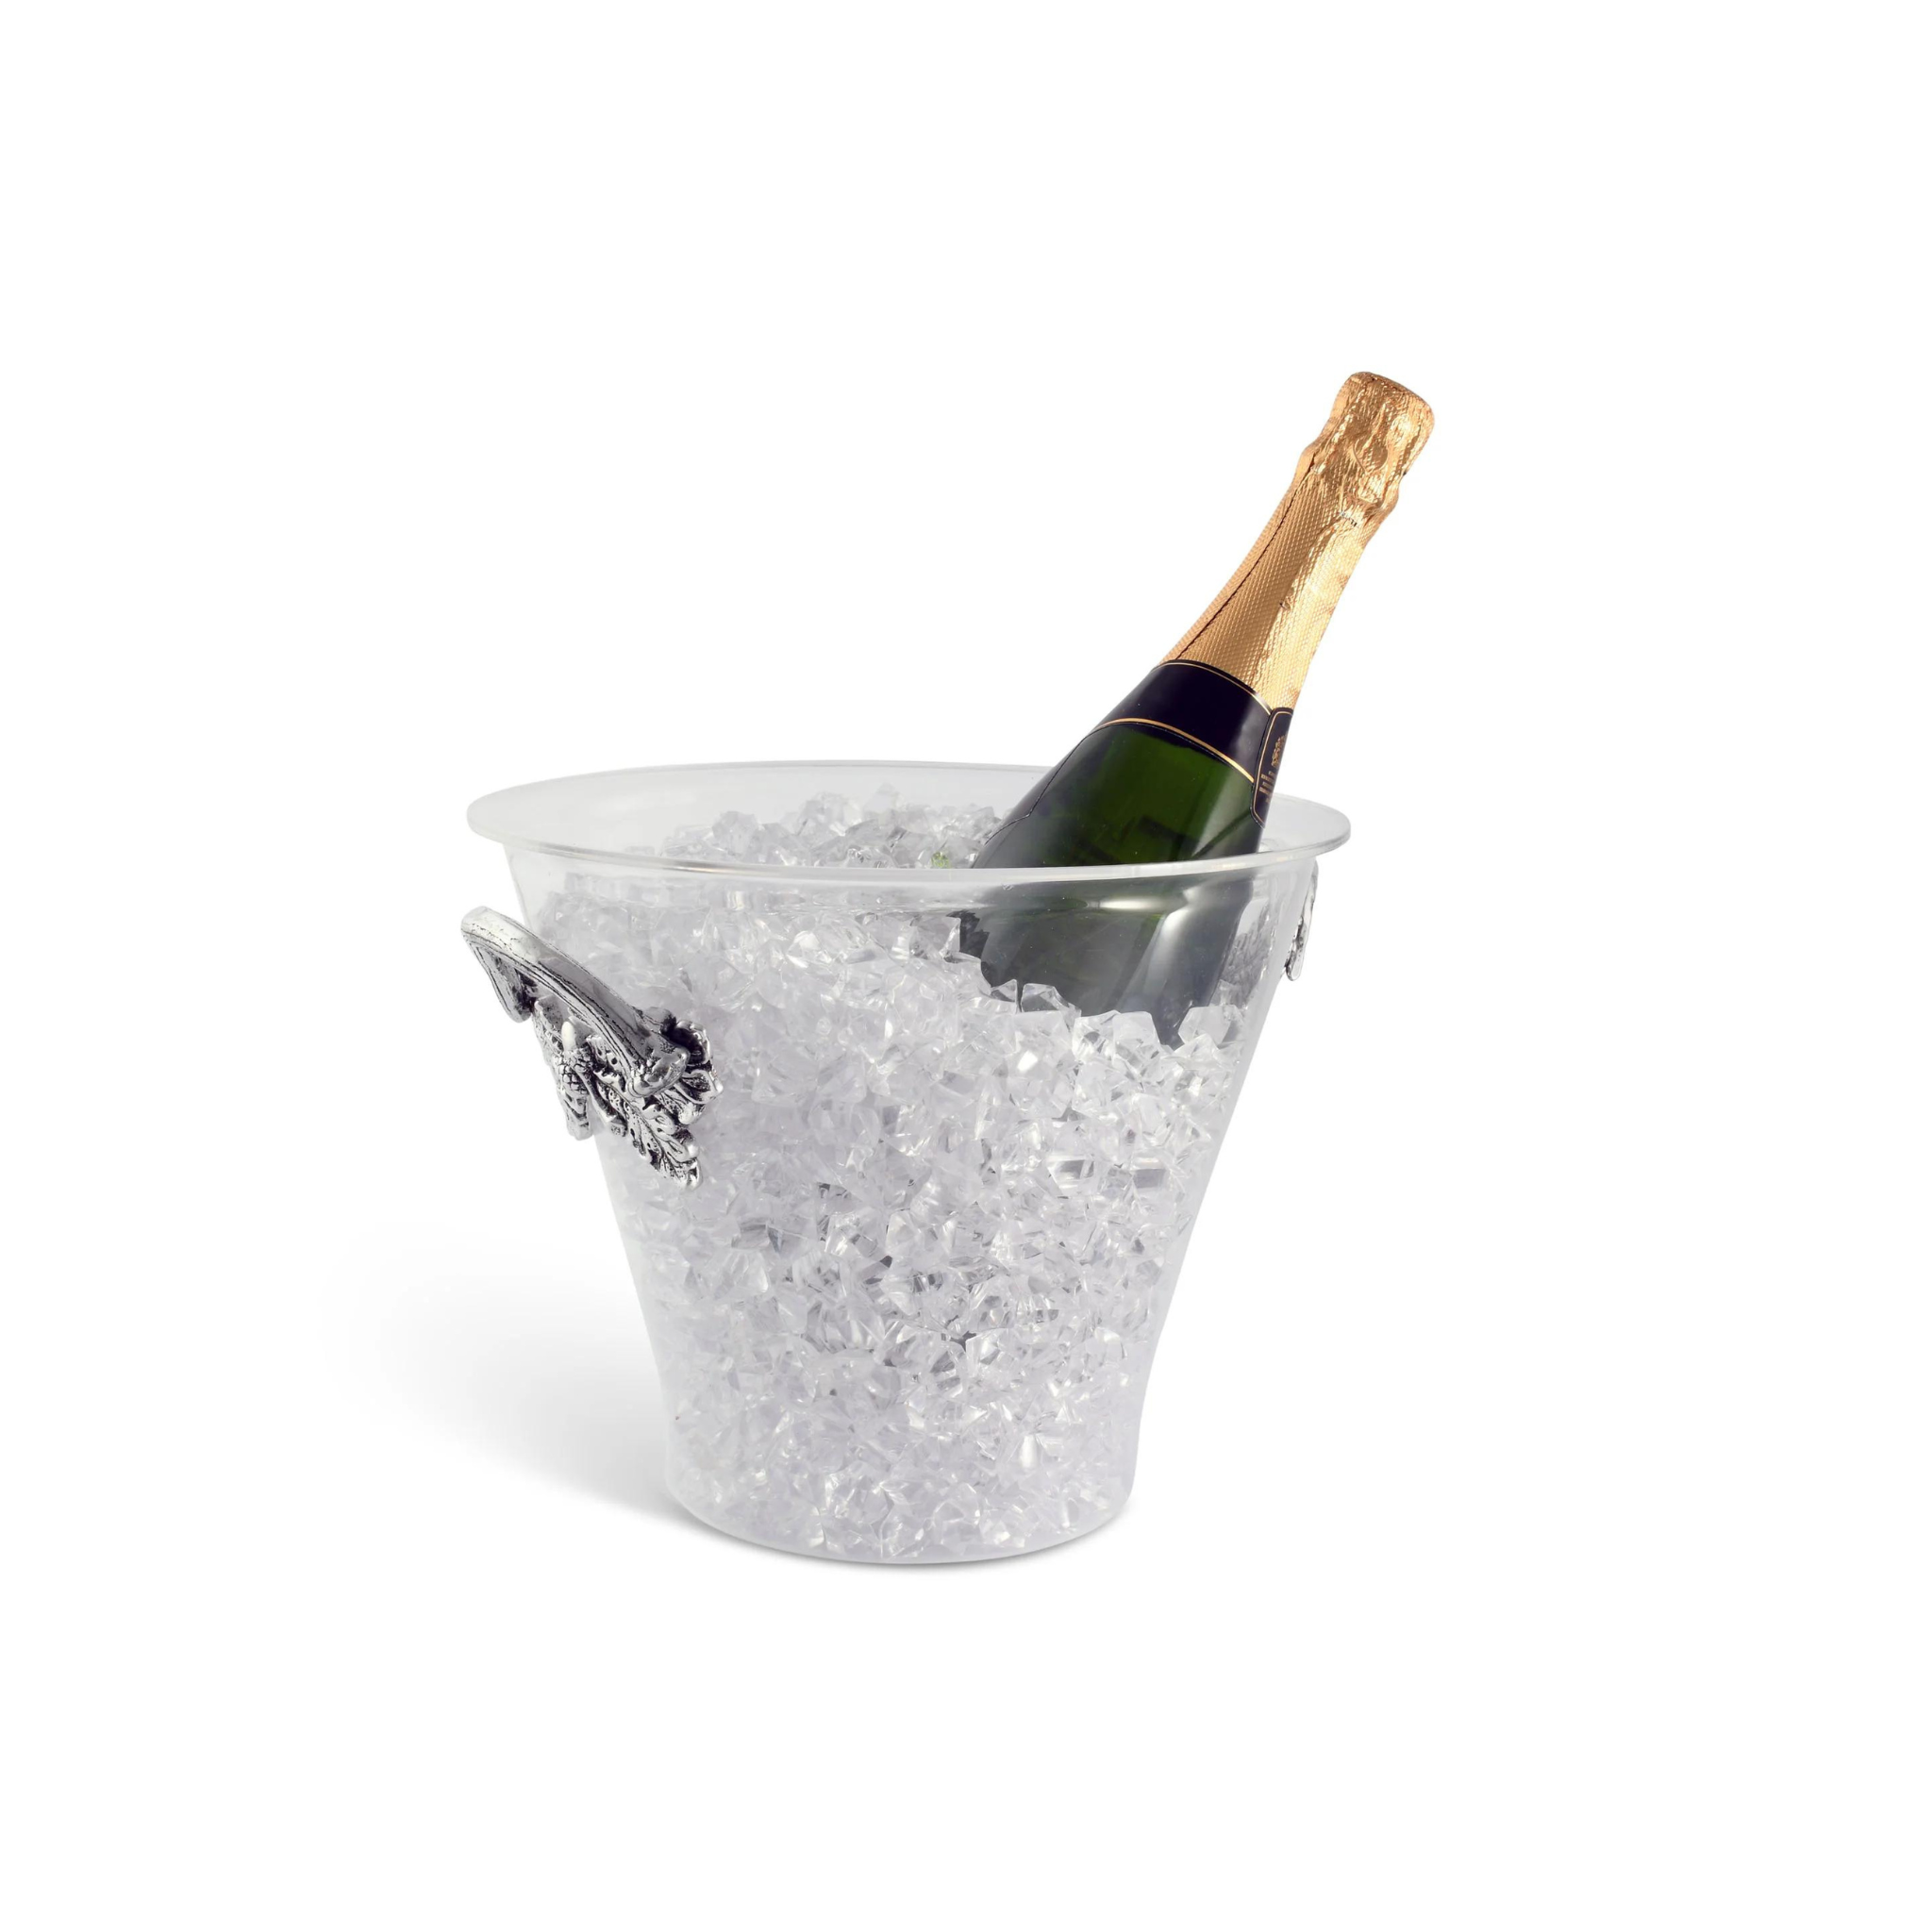 an acrylic ice bucket with metal antler and leave handles filled with ice and a champagne bottle